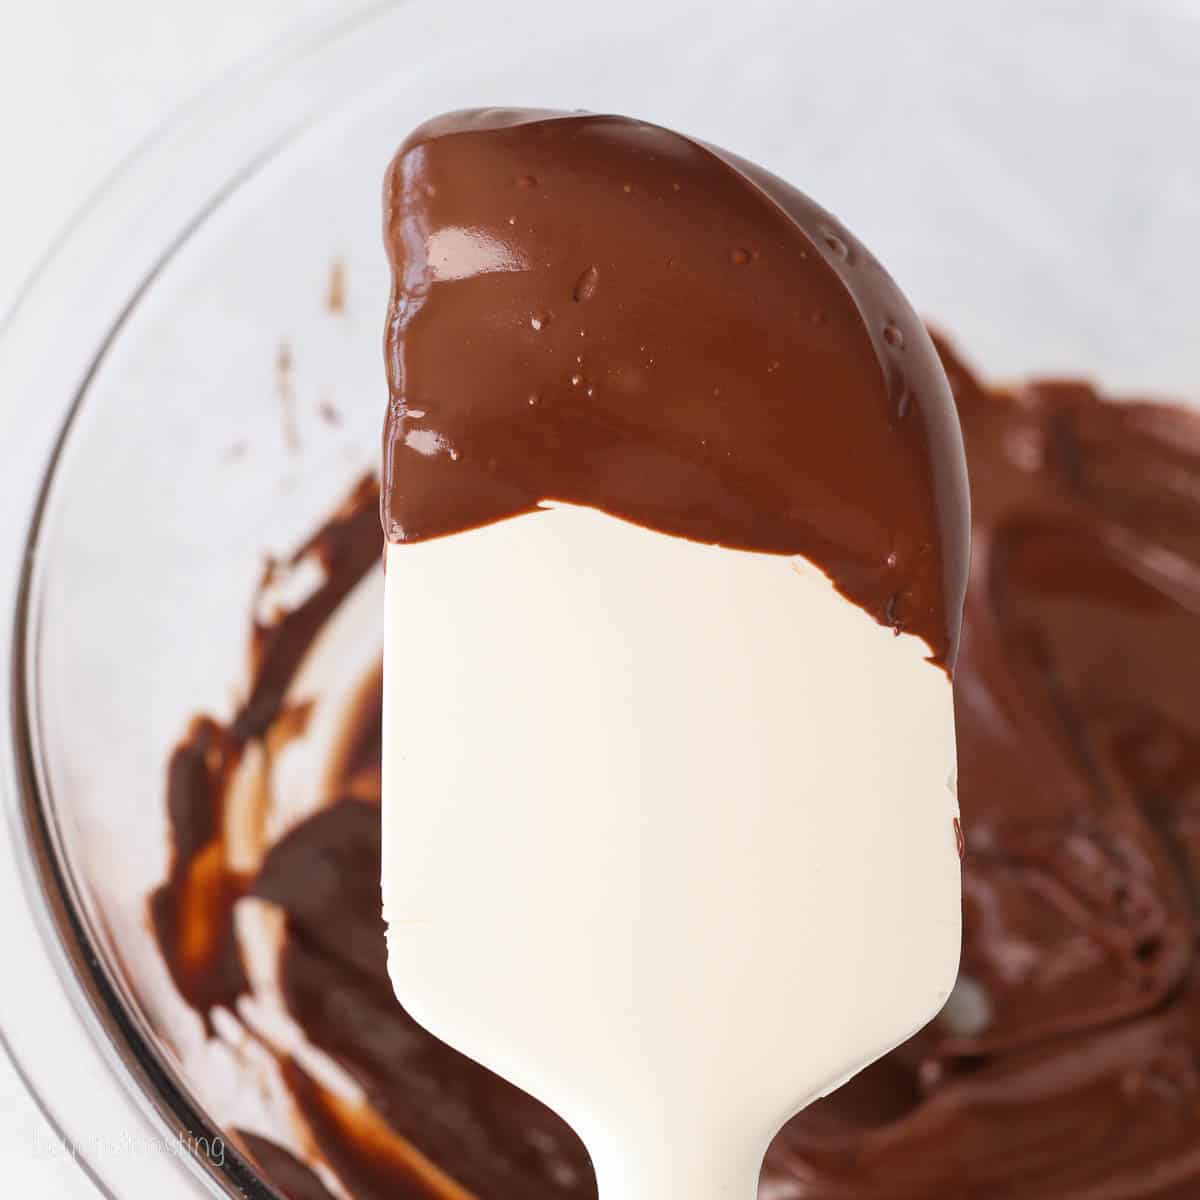 How to make melted chocolate 